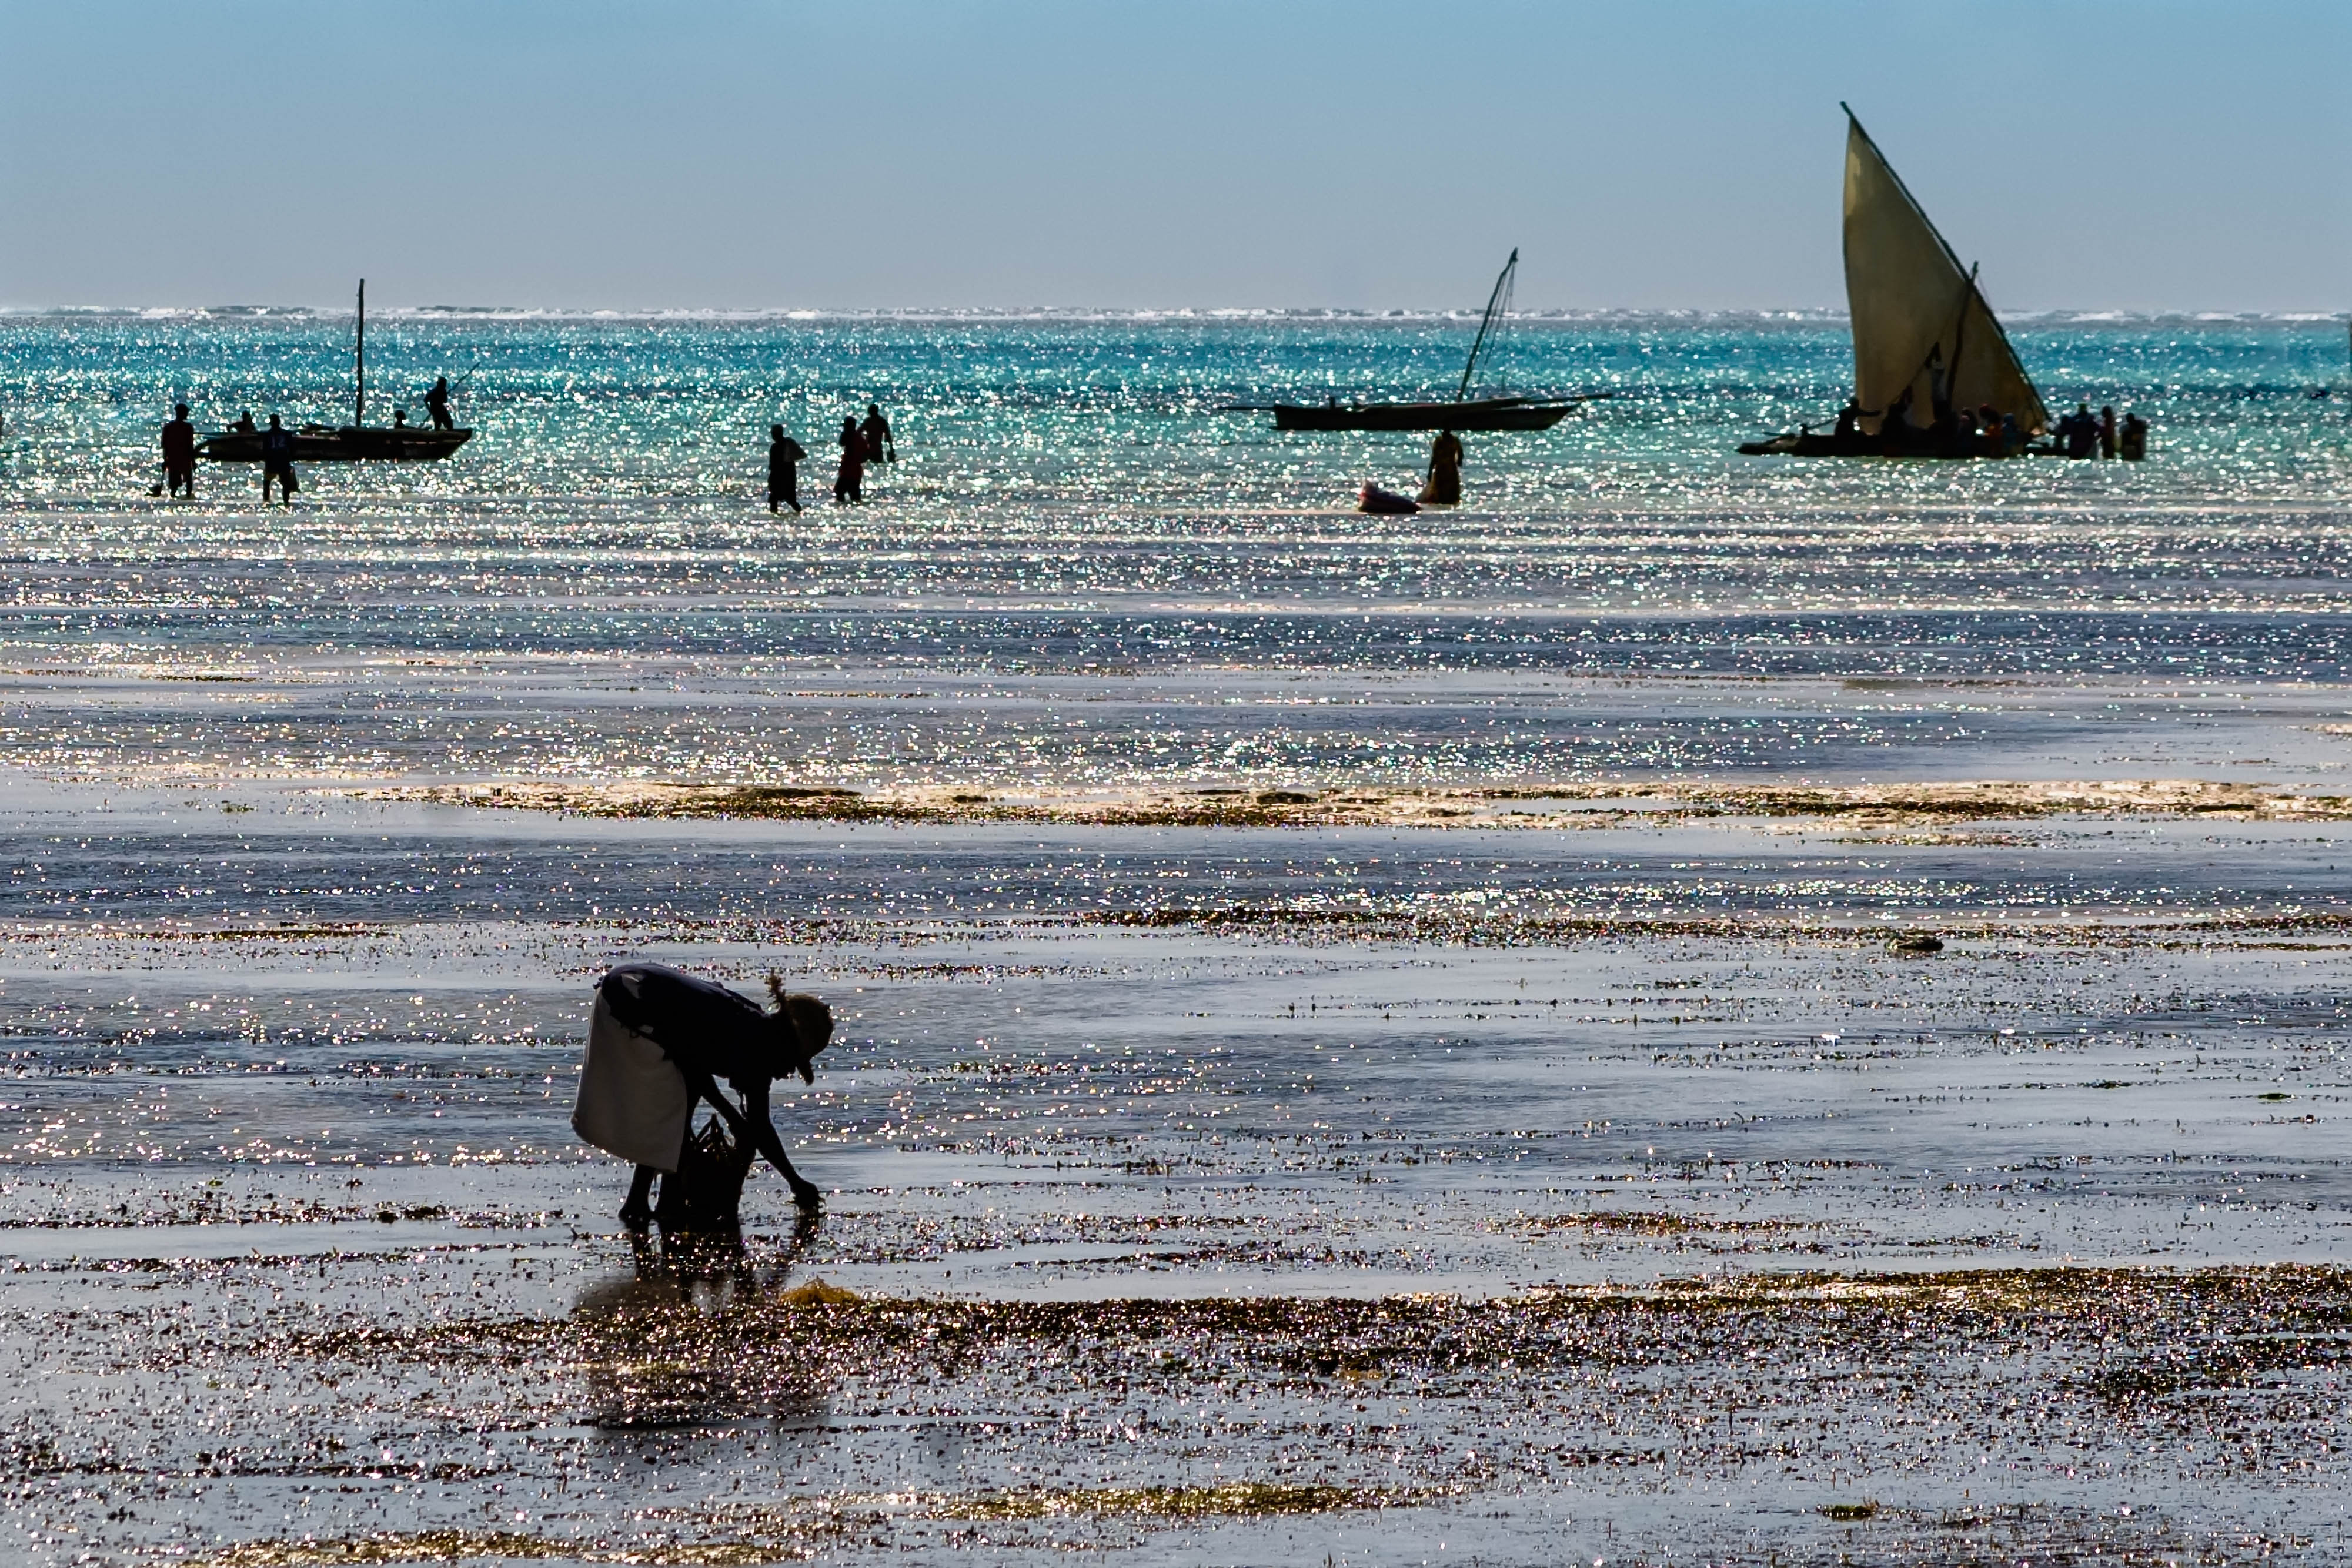 Collecting shells with low tide in Jambiani